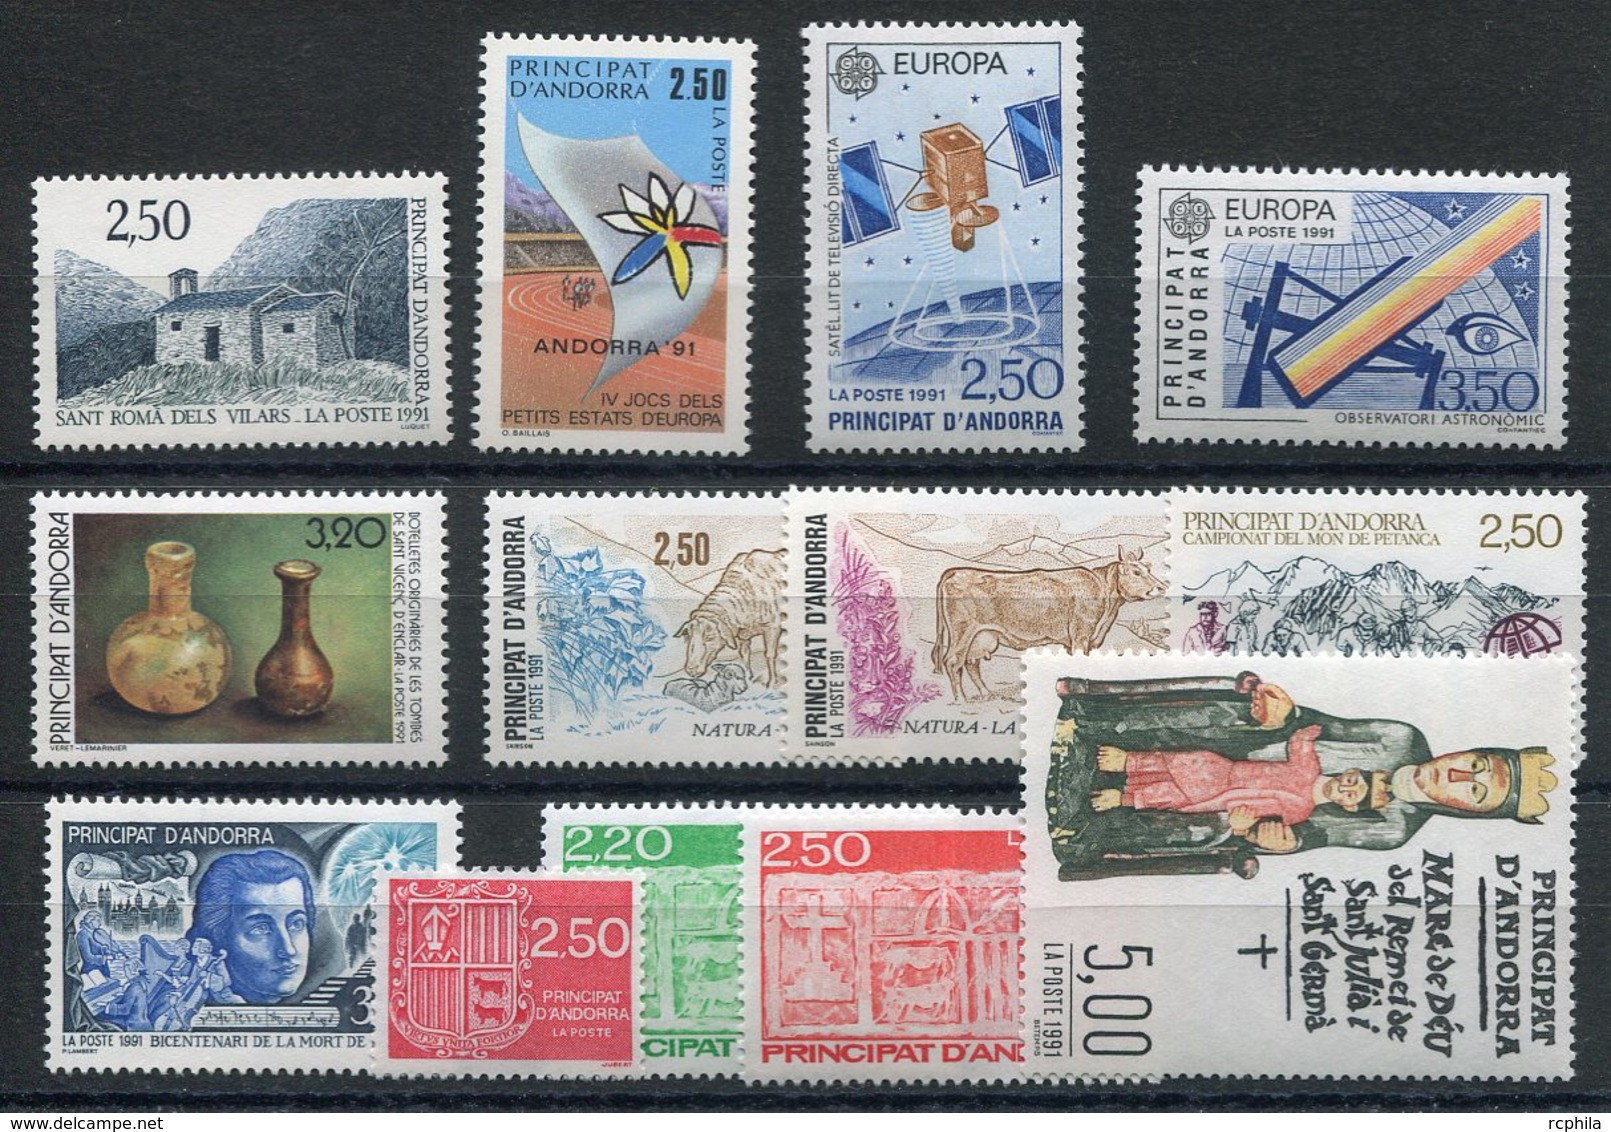 RC 19322 ANDORRE COTE 45,40€ - 1991 ANNÉE COMPLETE SOIT 13 TIMBRES N° 400 / 412 NEUF ** MNH TB - Full Years